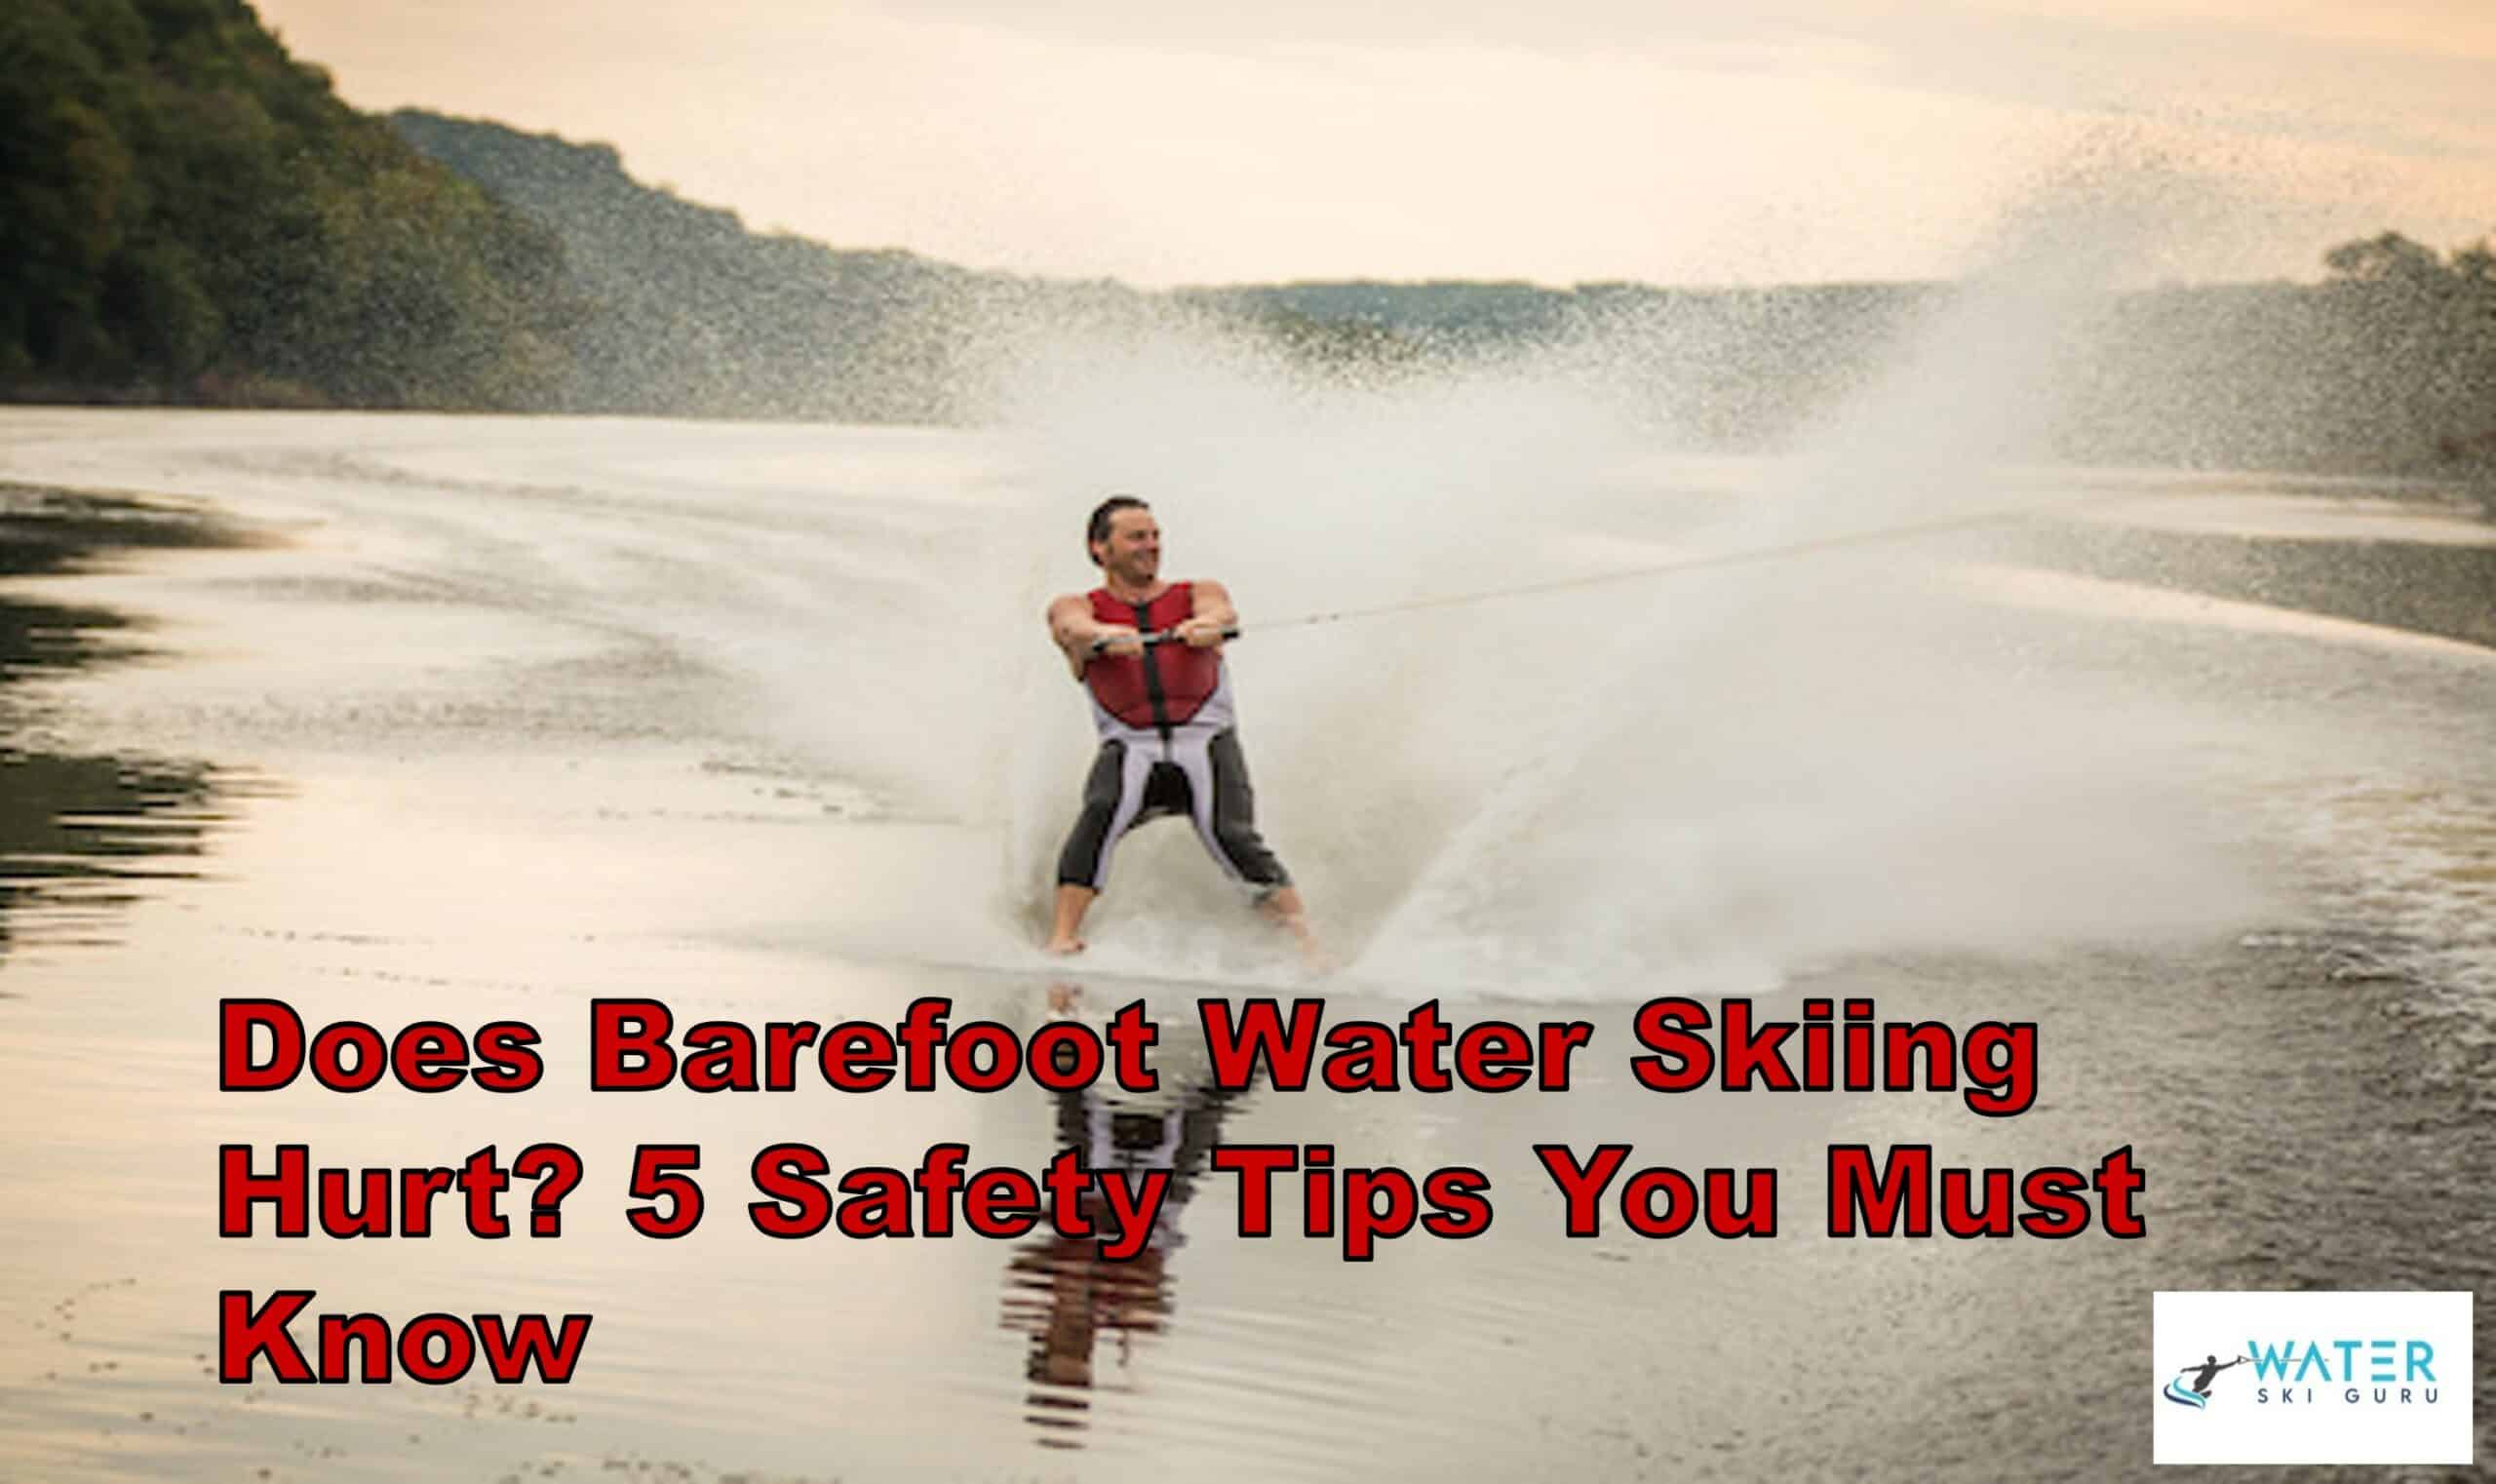 Does Barefoot Water Skiing Hurt 5 Safety Tips You Must Know